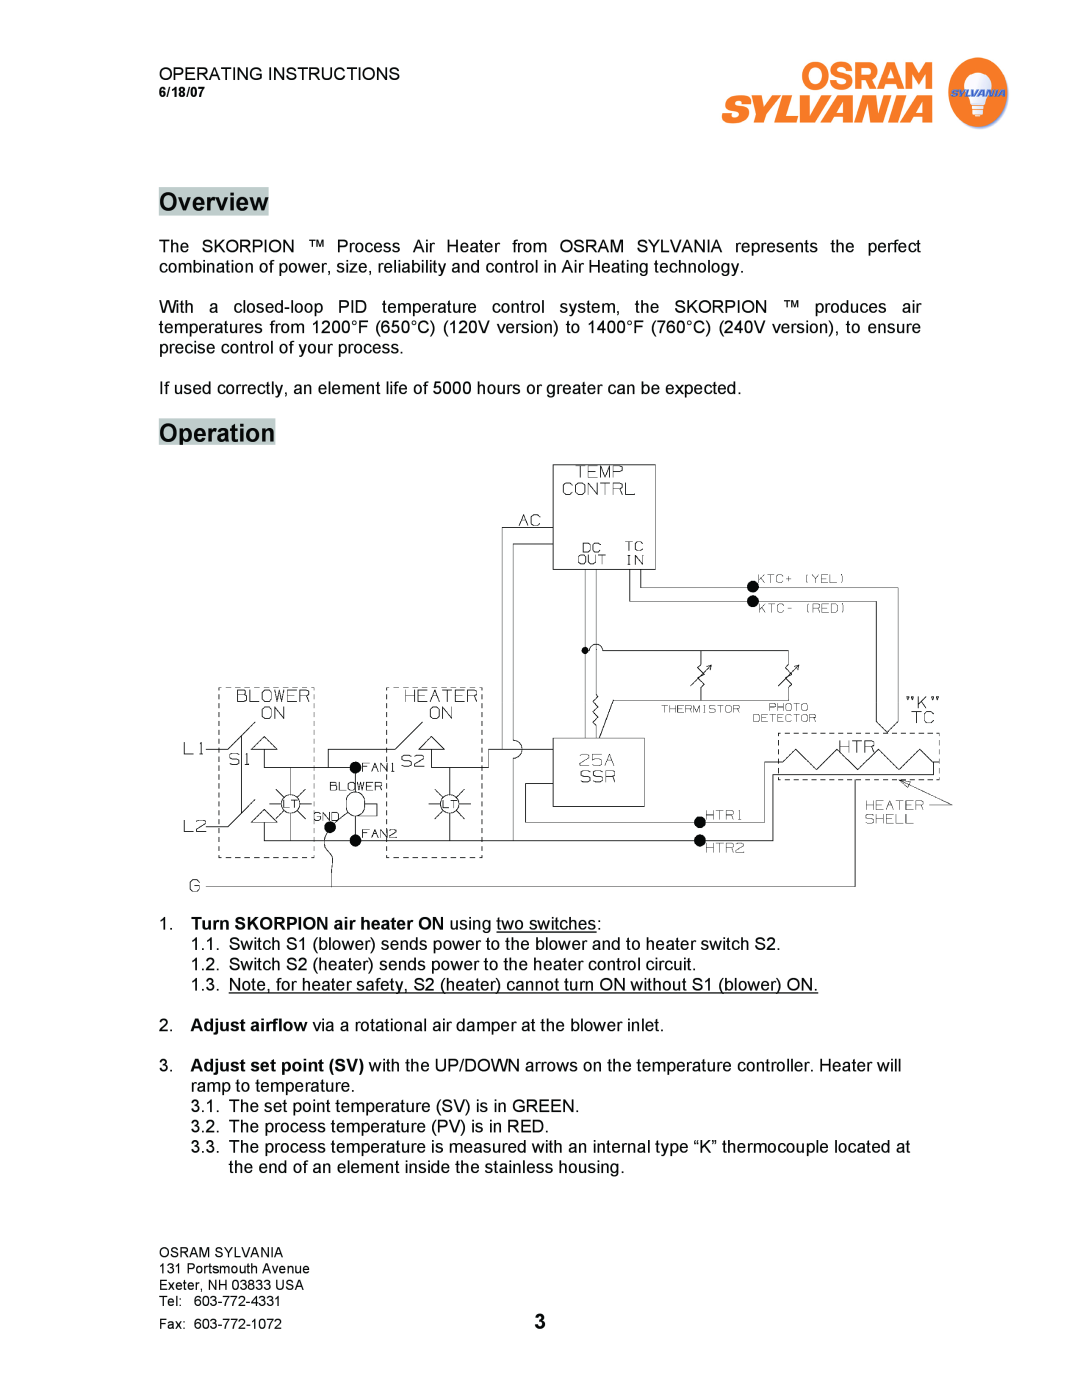 Sylvania F075615 operating instructions Overview, Operation, Turn SKORPION air heater ON using two switches 